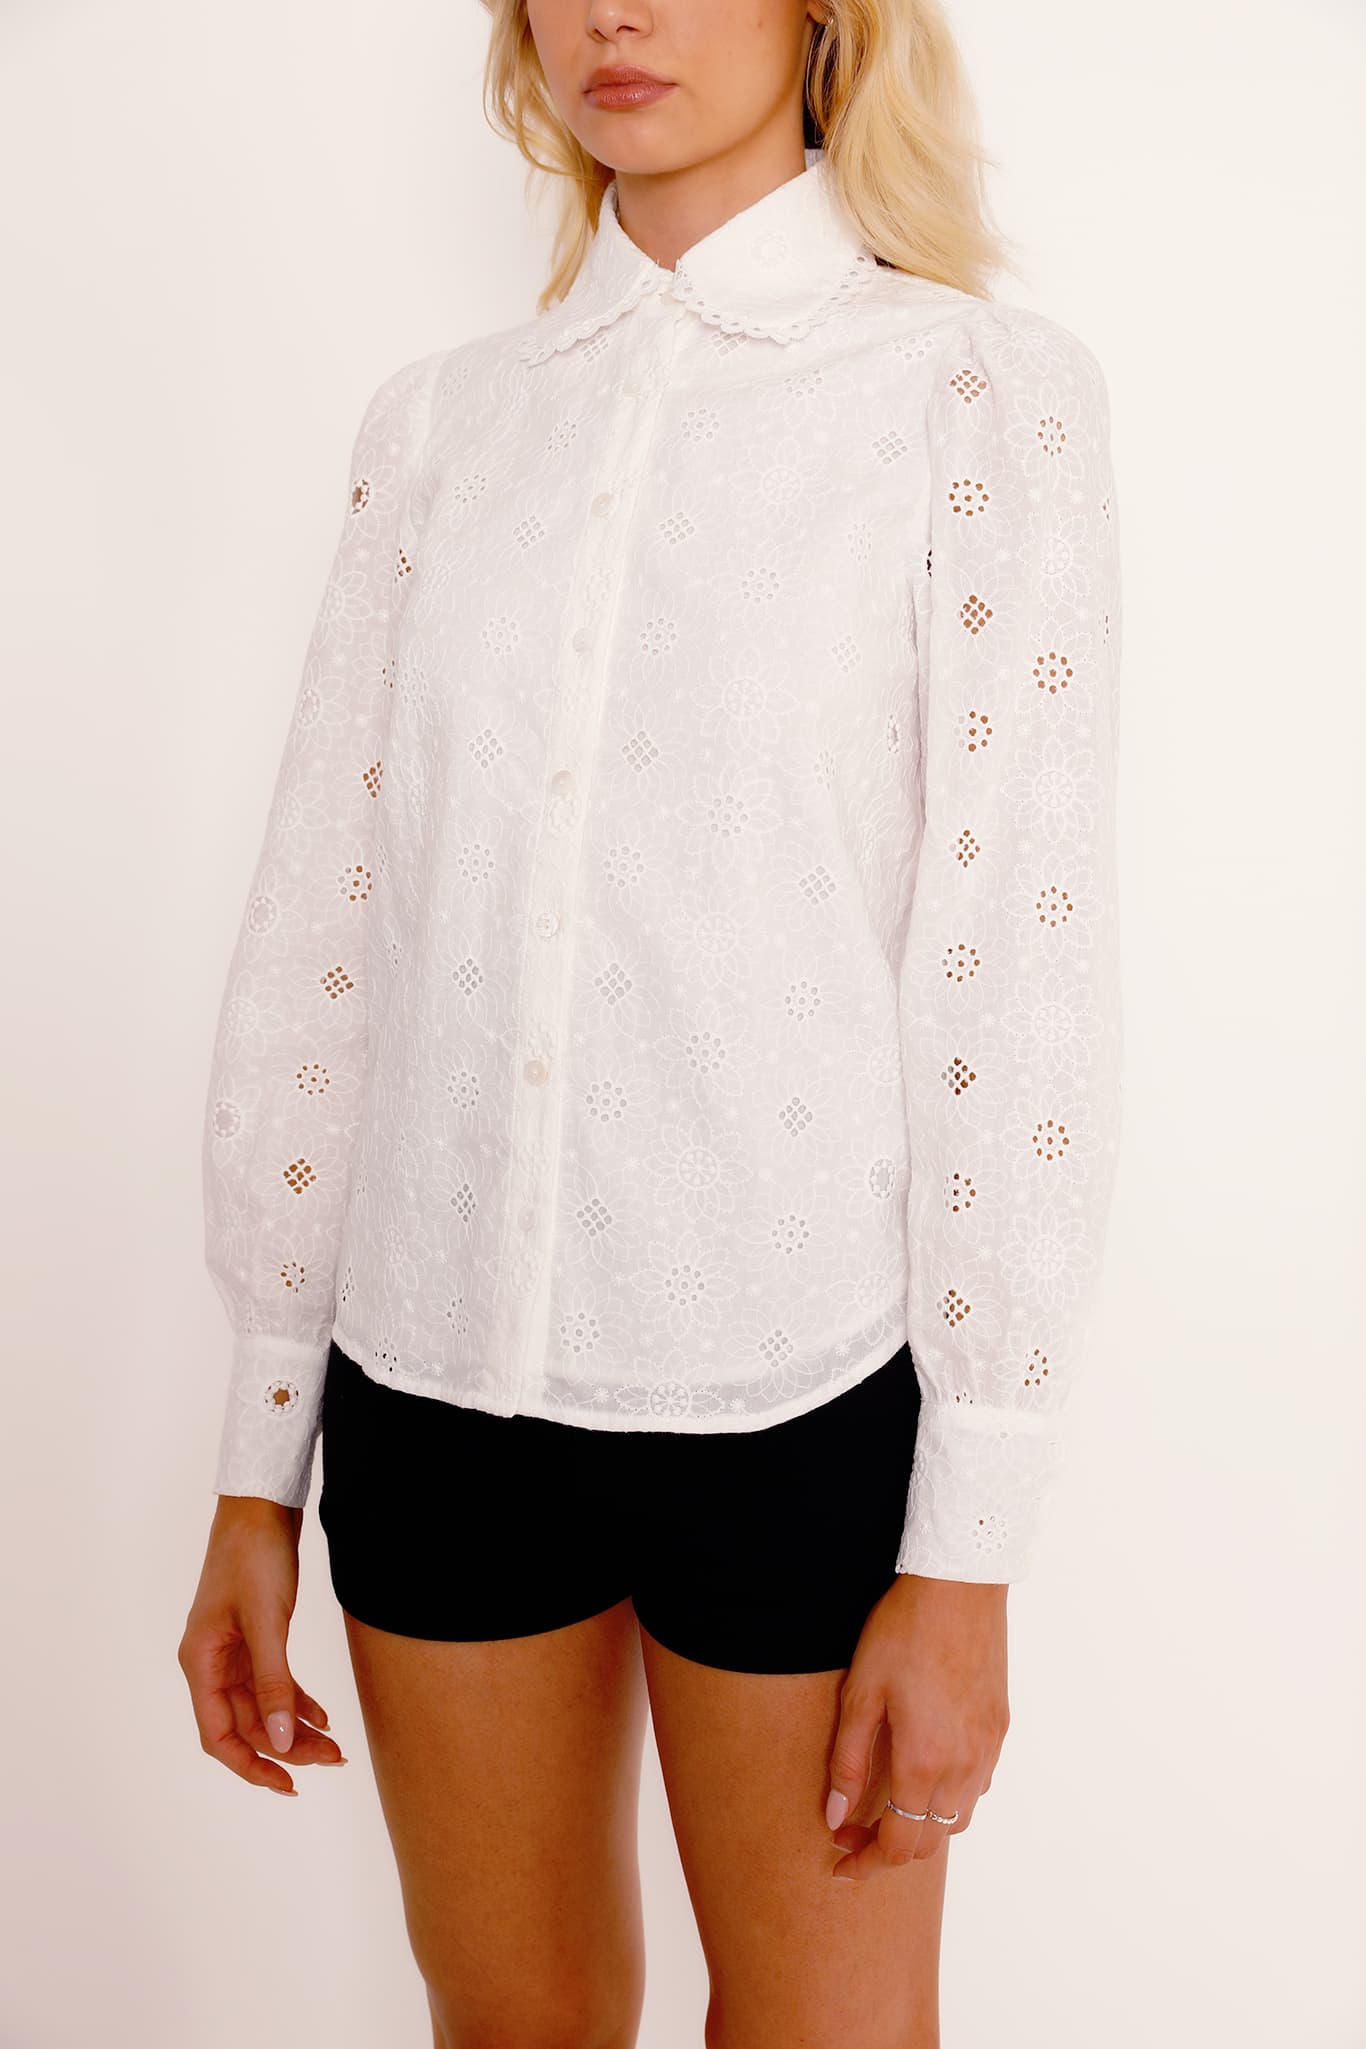 Broderie Anglaise White Collared Shirt - Limited